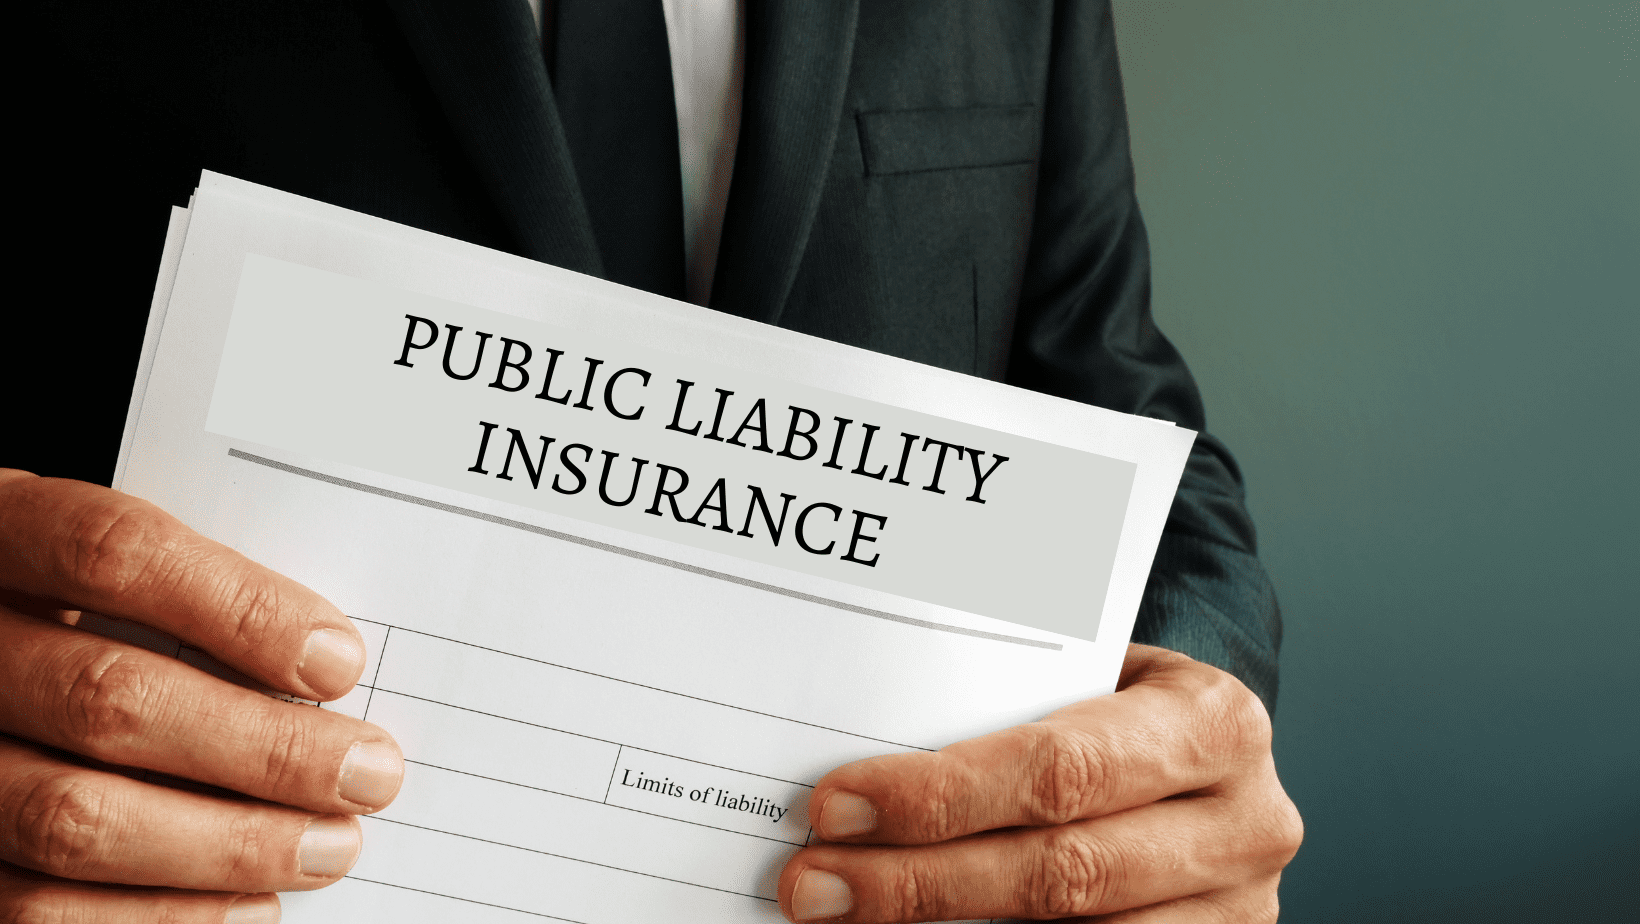 How does Public Liability Insurance work?